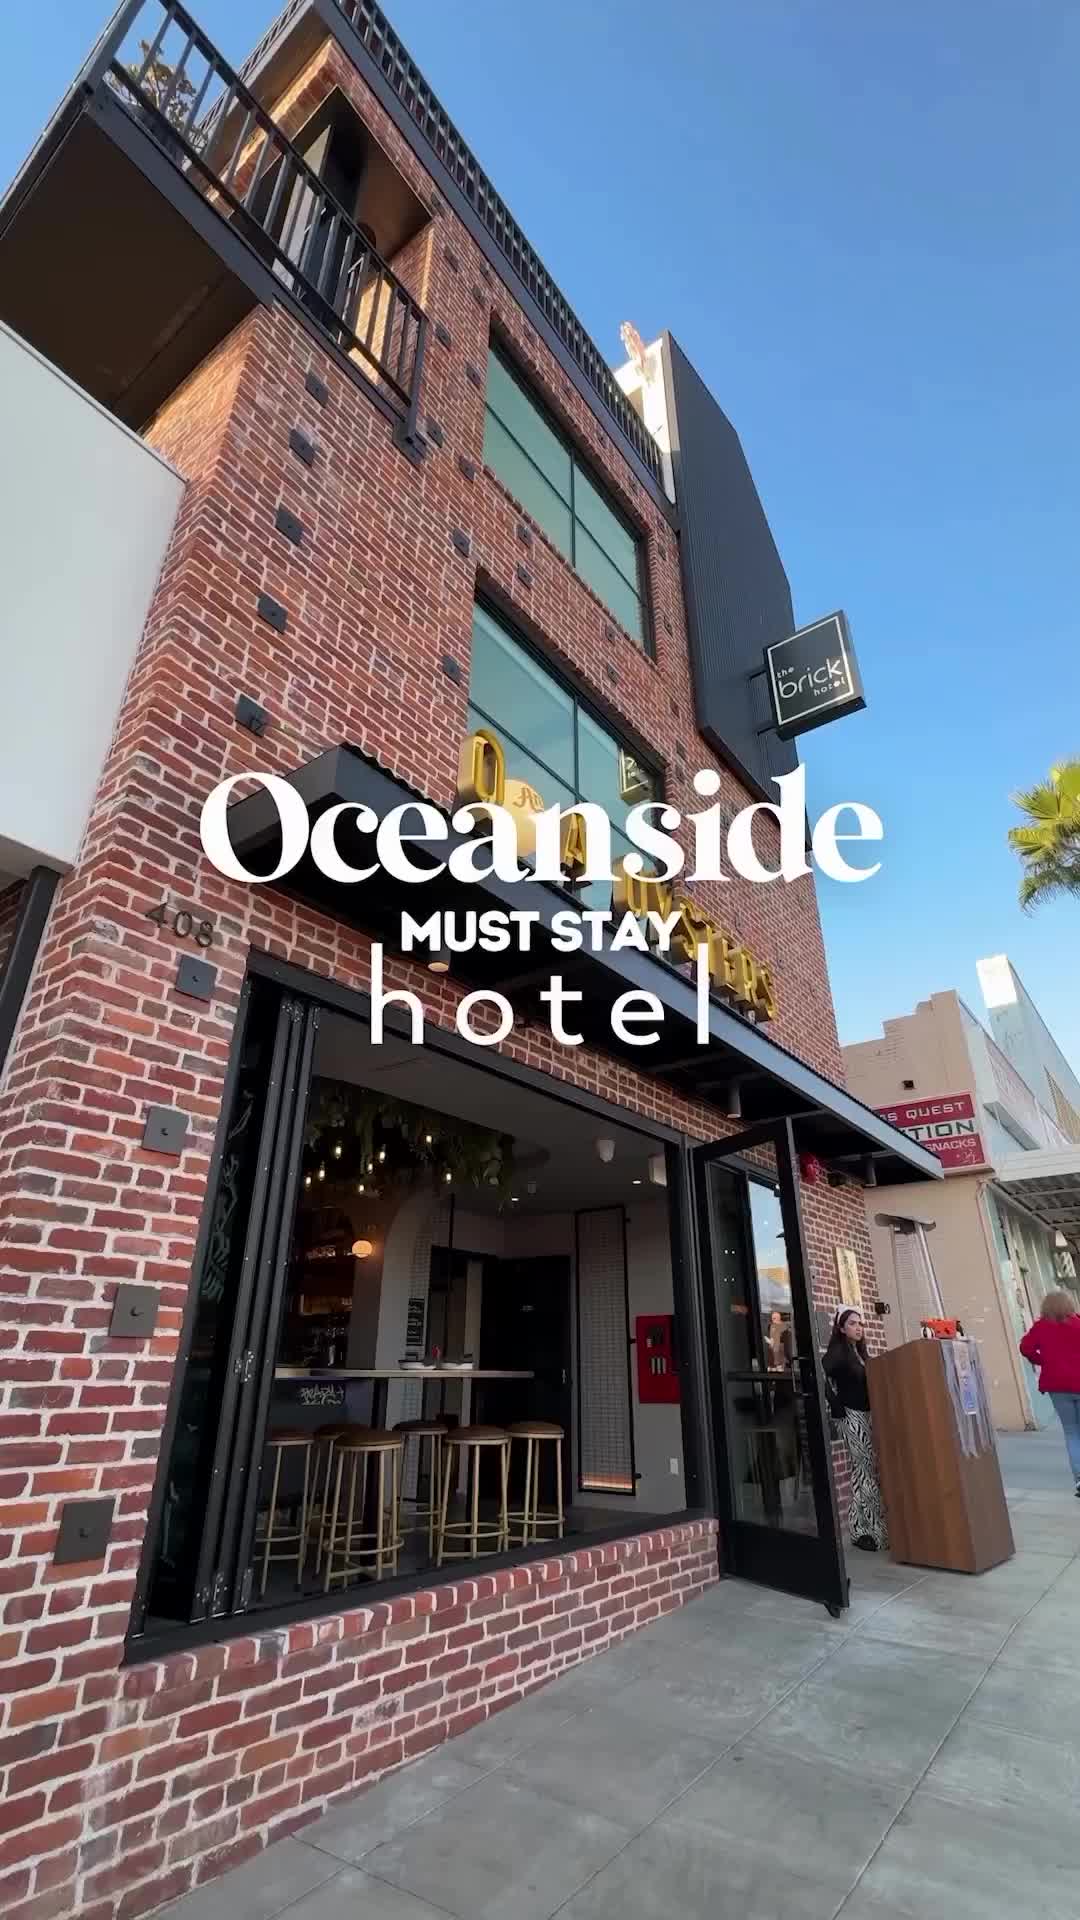 $1000 Staycation Giveaway - Luxury Boutique Hotel in Oceanside! 🌊 🍹🌅
📍@thebrickhotel | @visitoceanside
 
GIVEAWAY RULES BELOW! ⬇️
 
Have you been wanting a luxury staycation in @visitoceanside?We have partnered up with Visit Oceanside and The Brick Hotel to giveaway the ultimate winter staycation to ONE lucky SDFoodies follower the chance to win the ultimate staycation package worth over $1000!
 
This unique historic building set in the heart of downtown @visitoceanside is the hub for FIVE unique concepts and close to all the action! 
 
ONE - From cocktails at the stunning rooftop bar @cococabanaoside where you can soak up the sun and enjoy that O’side breeze! 🍹
 
TWO - To freshly shucked oysters, steak sandwiches, and unique creole inspired food at @shuckwitus 🦪
 
THREE - Craft cocktails can be found at the hottest bar in town at @frankiesoceanside, pro tip: order from the QR code to get bites from @shuckwitus! 🍸
 
FOUR - Craft beer lovers will be pleased with the @stoneoceanside location on the backside, where you will find all the hoppy beers and fire pits one needs! 🔥
 
FIVE - Don’t forget coffee! @succulentcoffeeoceanside is the cutest gem located on the ground floor serving up tasty lattes and crafty succulents! 🌵
 
WHAT YOU WIN!* ✨
2-night stay at @thebrickhotel
Complimentary access to Delve Yoga classes during stay
Complimentary access to F45 training gym during stay
Drink voucher for two to @succulentcoffeeoceanside
Drink voucher for two to @cococabanaoside
Drink voucher for two to @shuckwitus 
 
GIVEAWAY RULES ⬇️
Follow @dineoside
Follow @thebrickhotel
Follow @sdfoodies
Comment with who you are bringing! 
 
EXTRA CREDIT: Head to link in bio about @thebrickhotel and sign up for our mailing list for an extra entry! 
 
Remember to avoid spam, only @sdfoodies will announce the winner, we will NEVER ask for any credit card information. Only one winner will be picked and will be announced on this post on 12/4. *Travel for giveaway must be completed by February 28th 2024. 

#sandiego #visitoceanside #sdfoodies #hotels